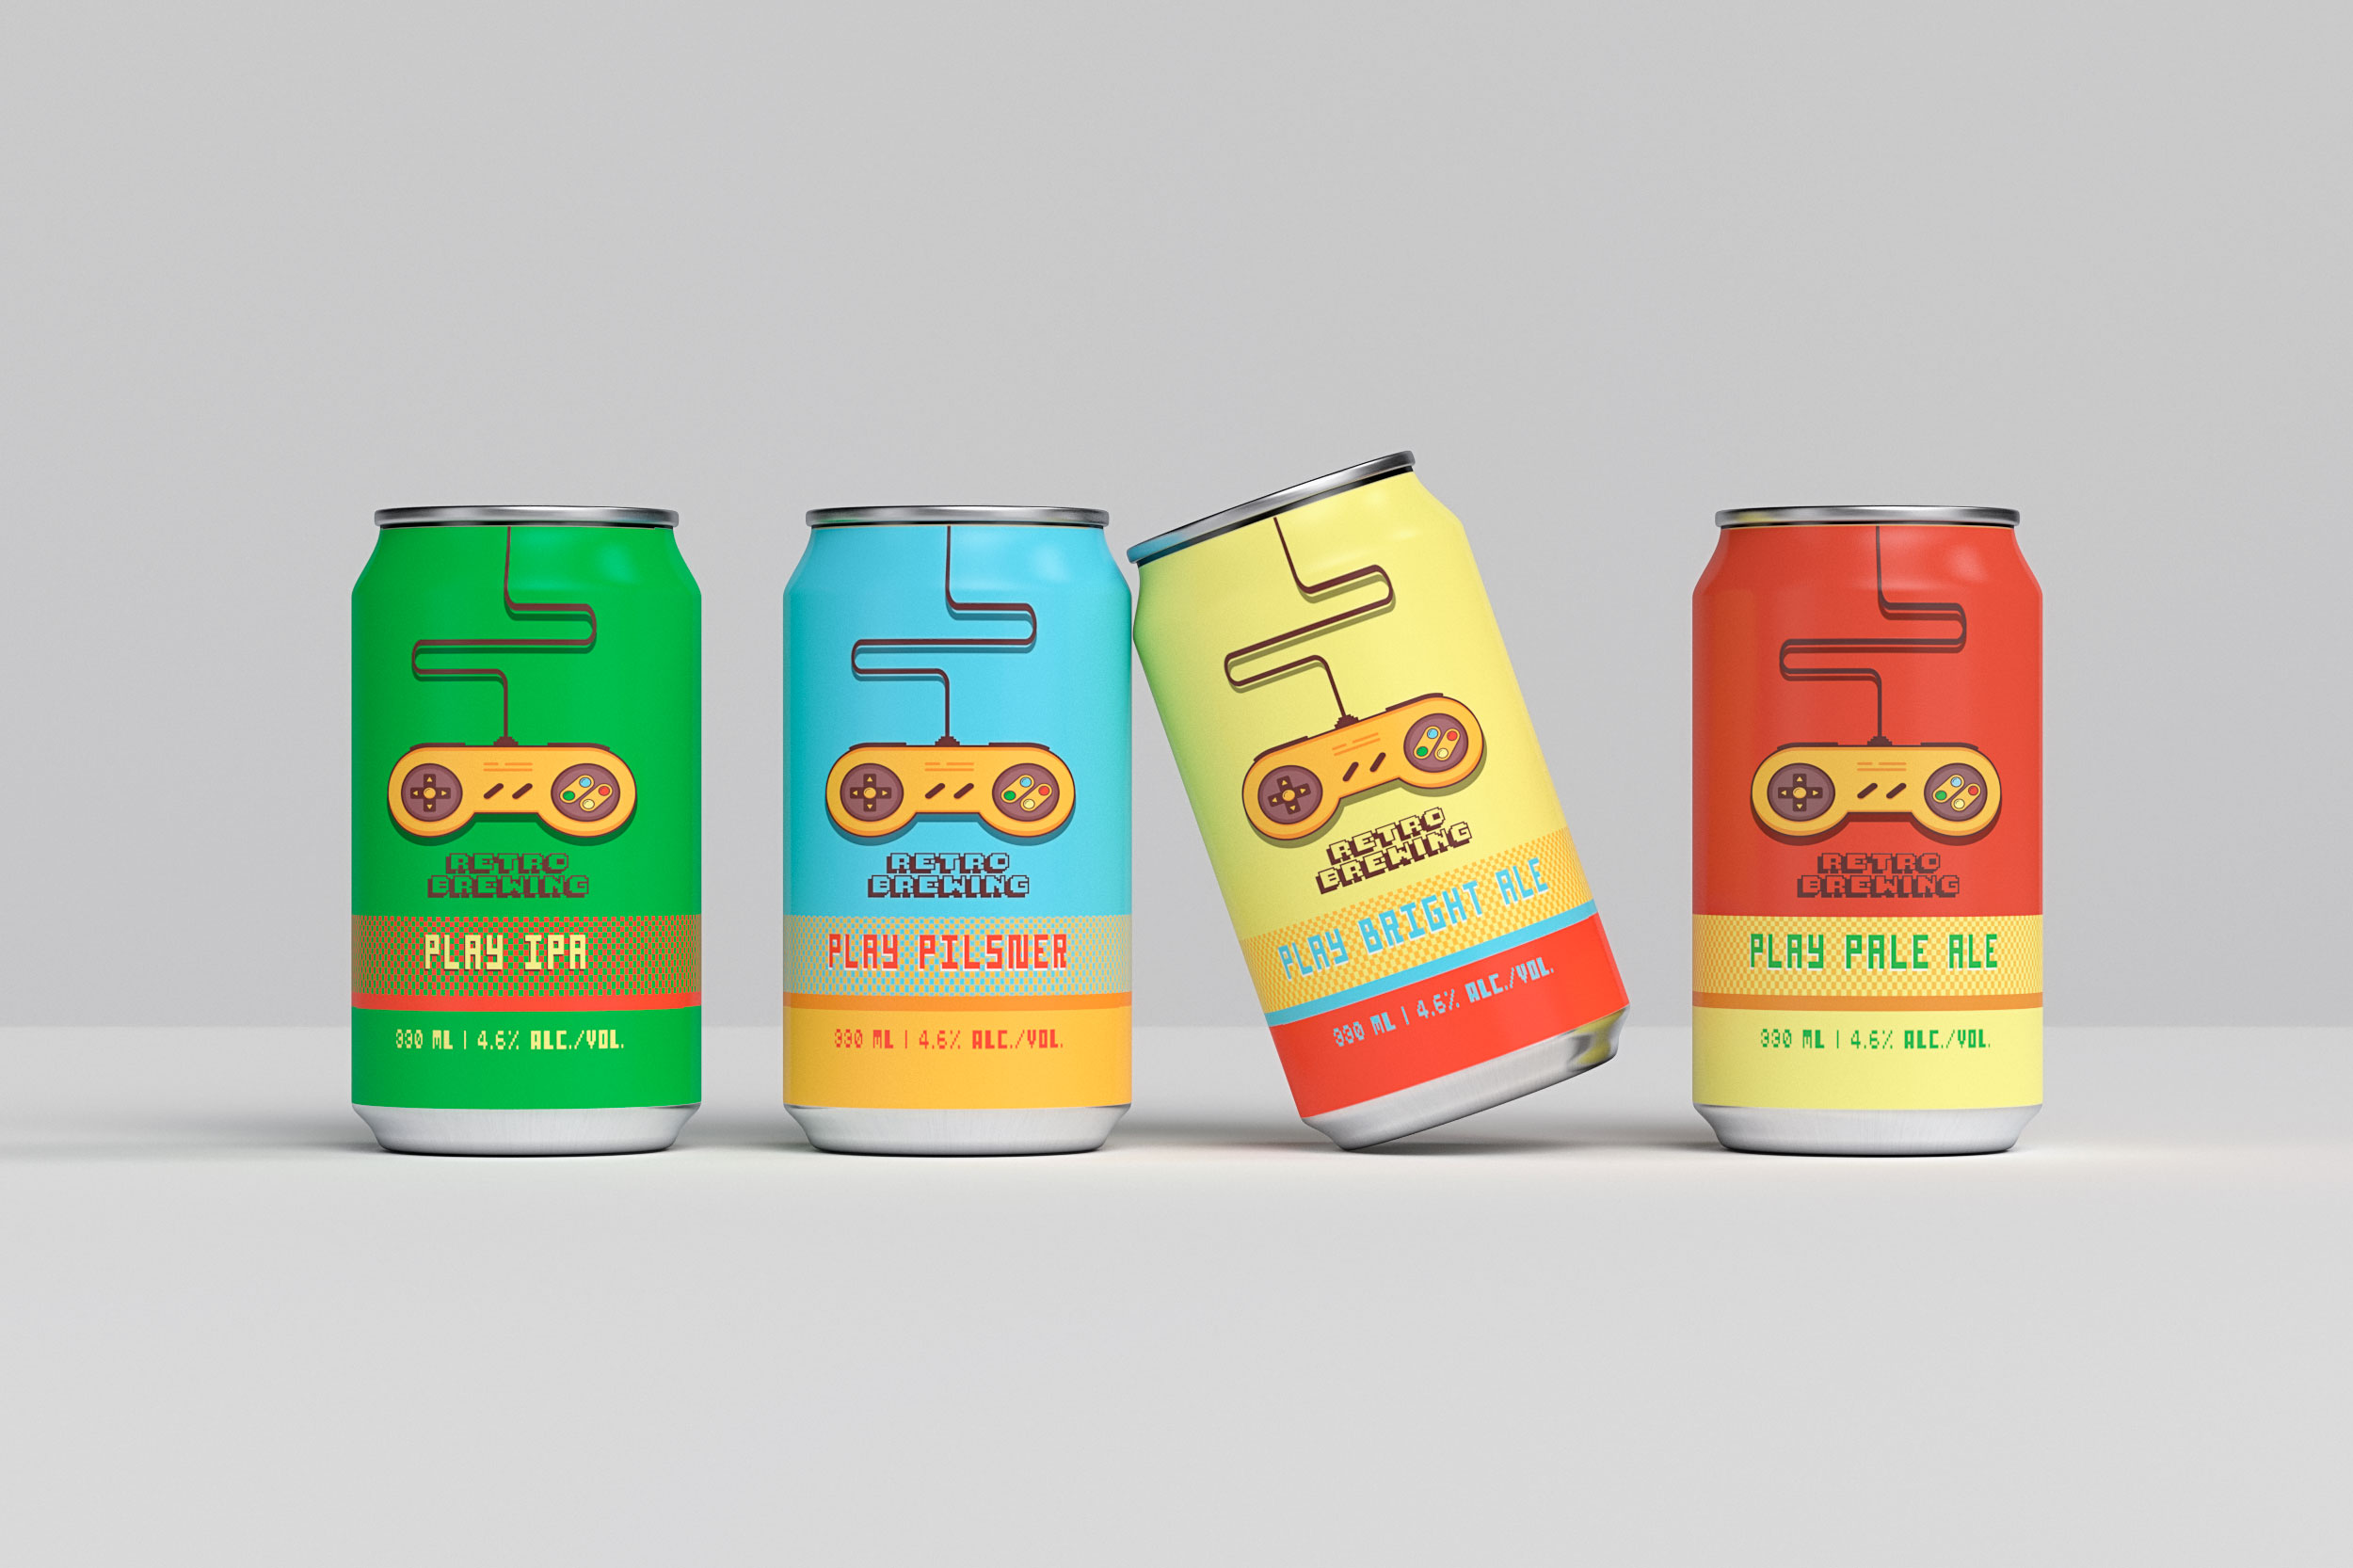 Retro gaming beer cans.